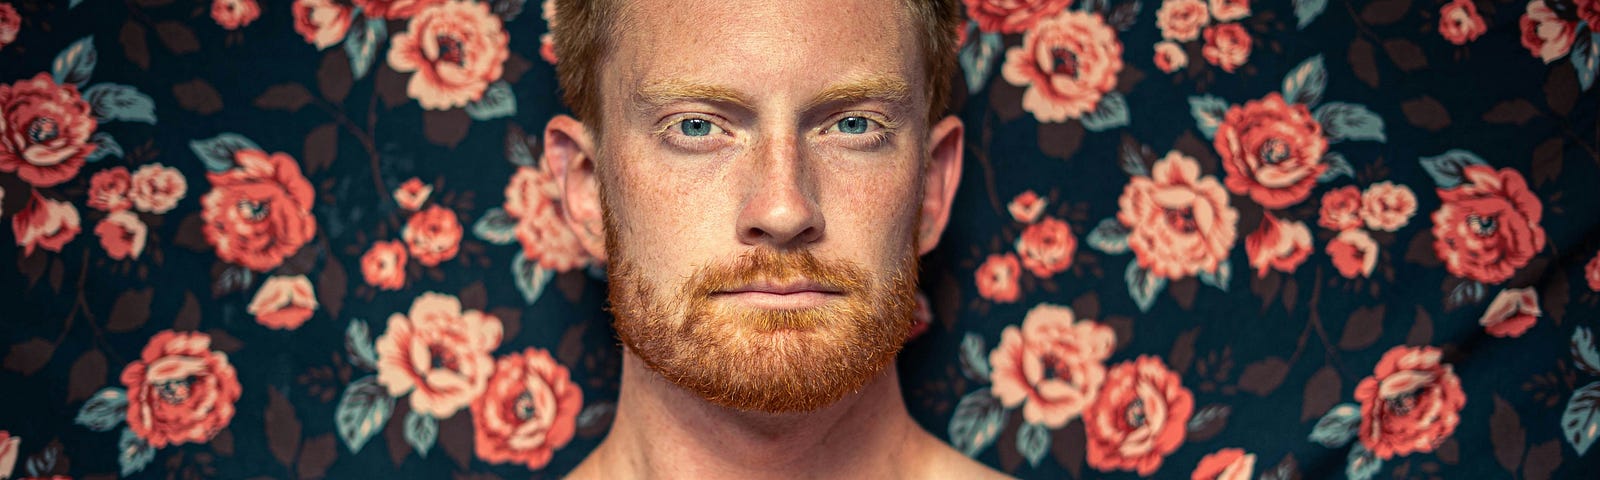 A man with freckles poses in front of a flowery wallpaper backdrop.